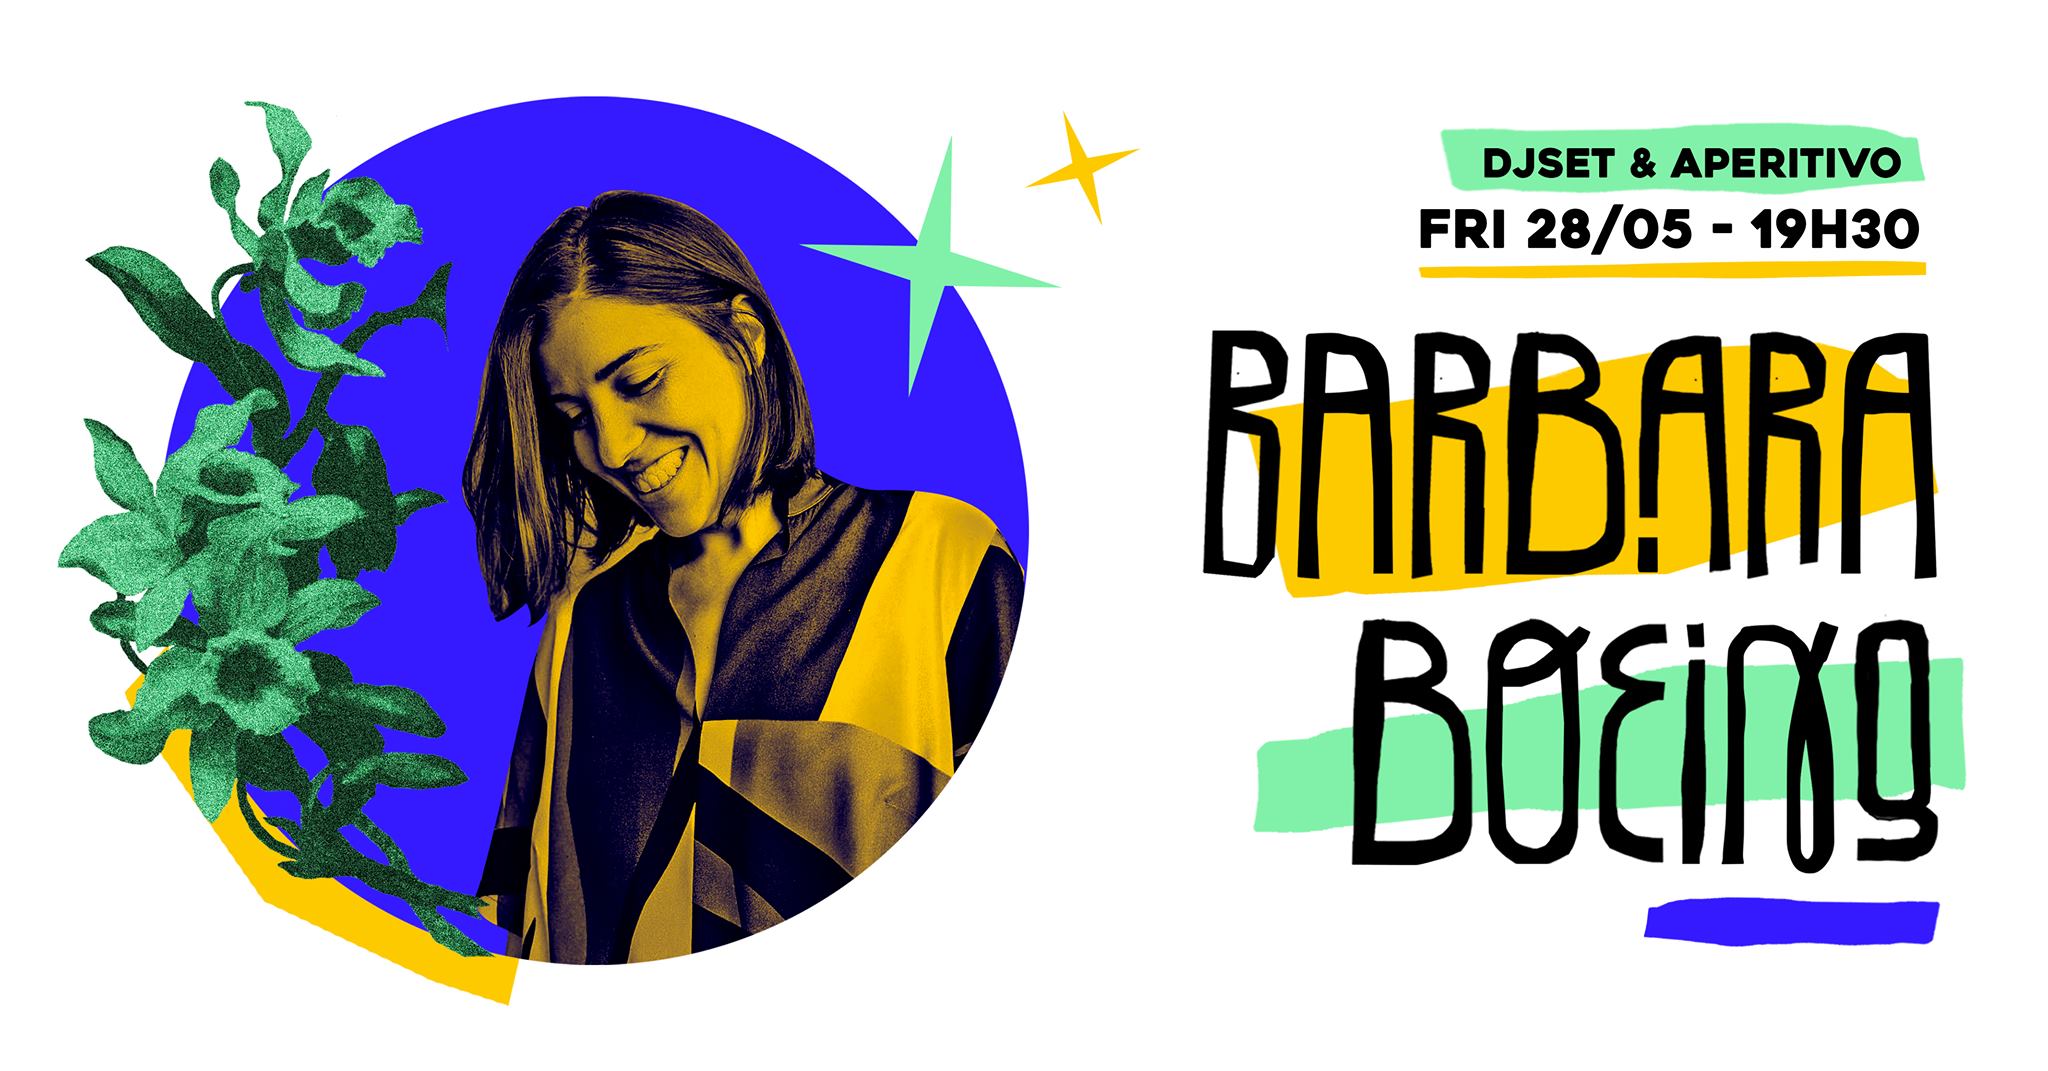 SOLD OUT - Barbara Boeing - DJset & Aperitivo